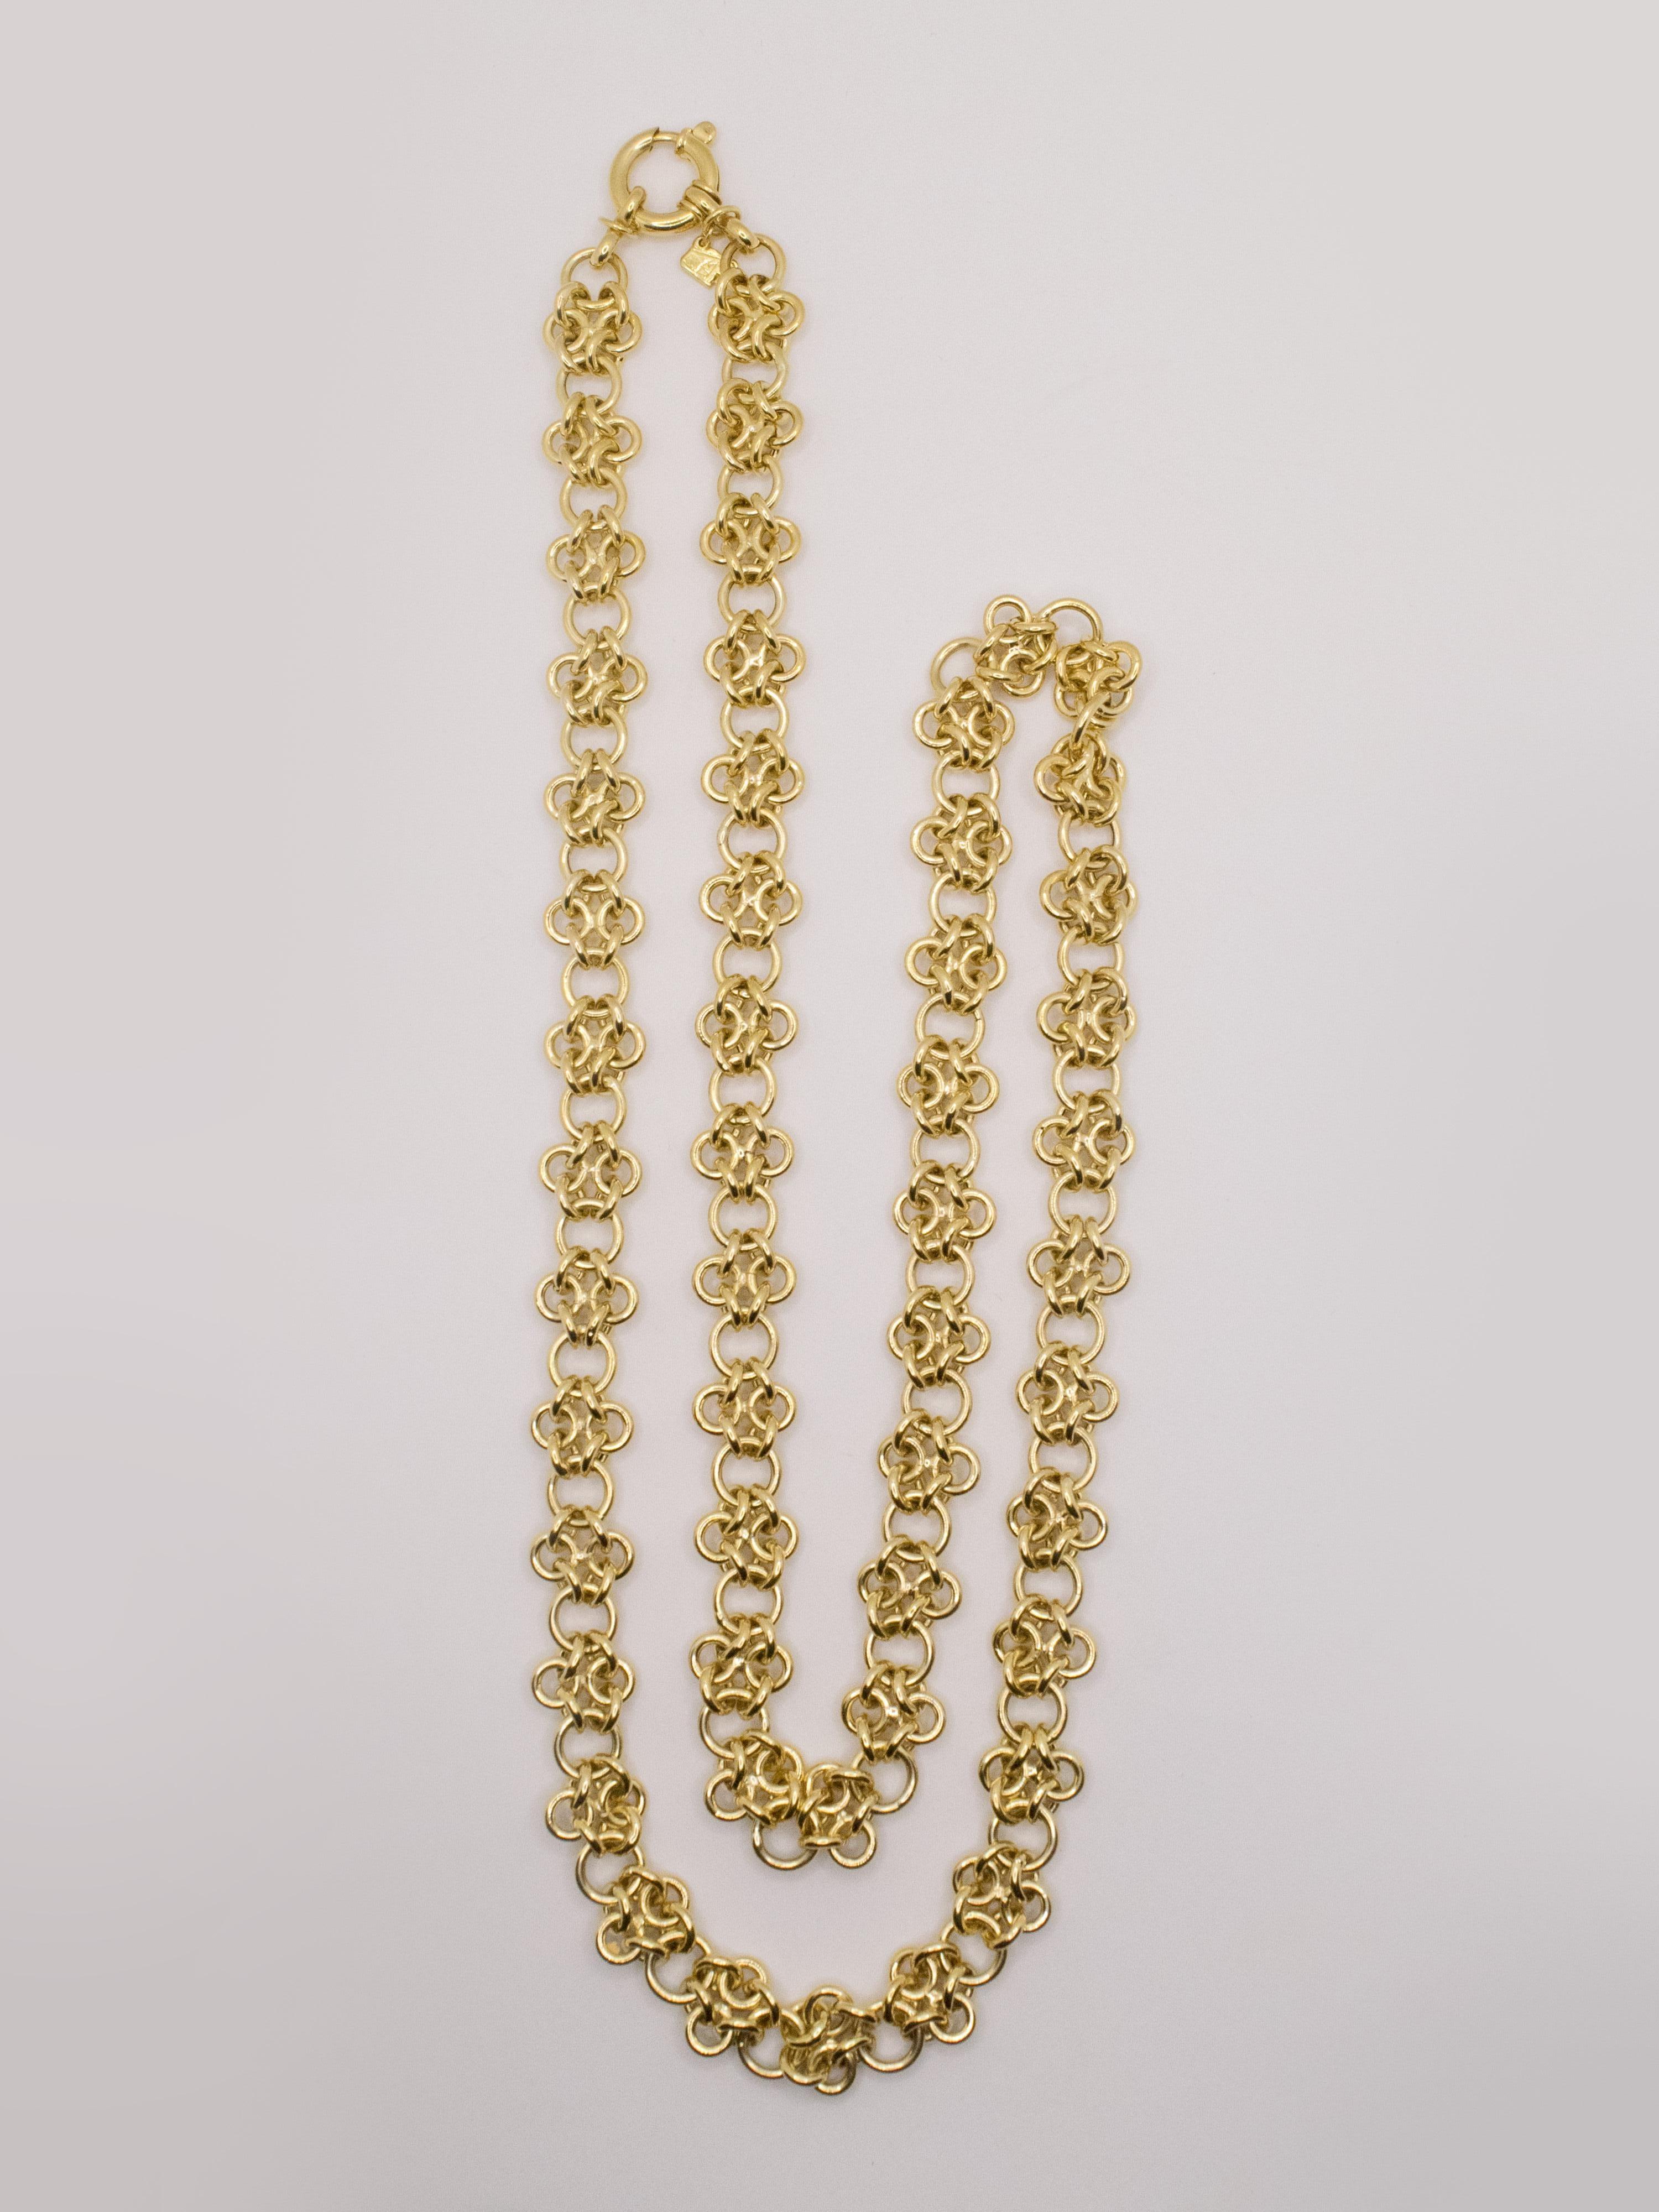 Massive Byzantine Knitted Necklace in 18 kt Yellow Gold  For Sale 1